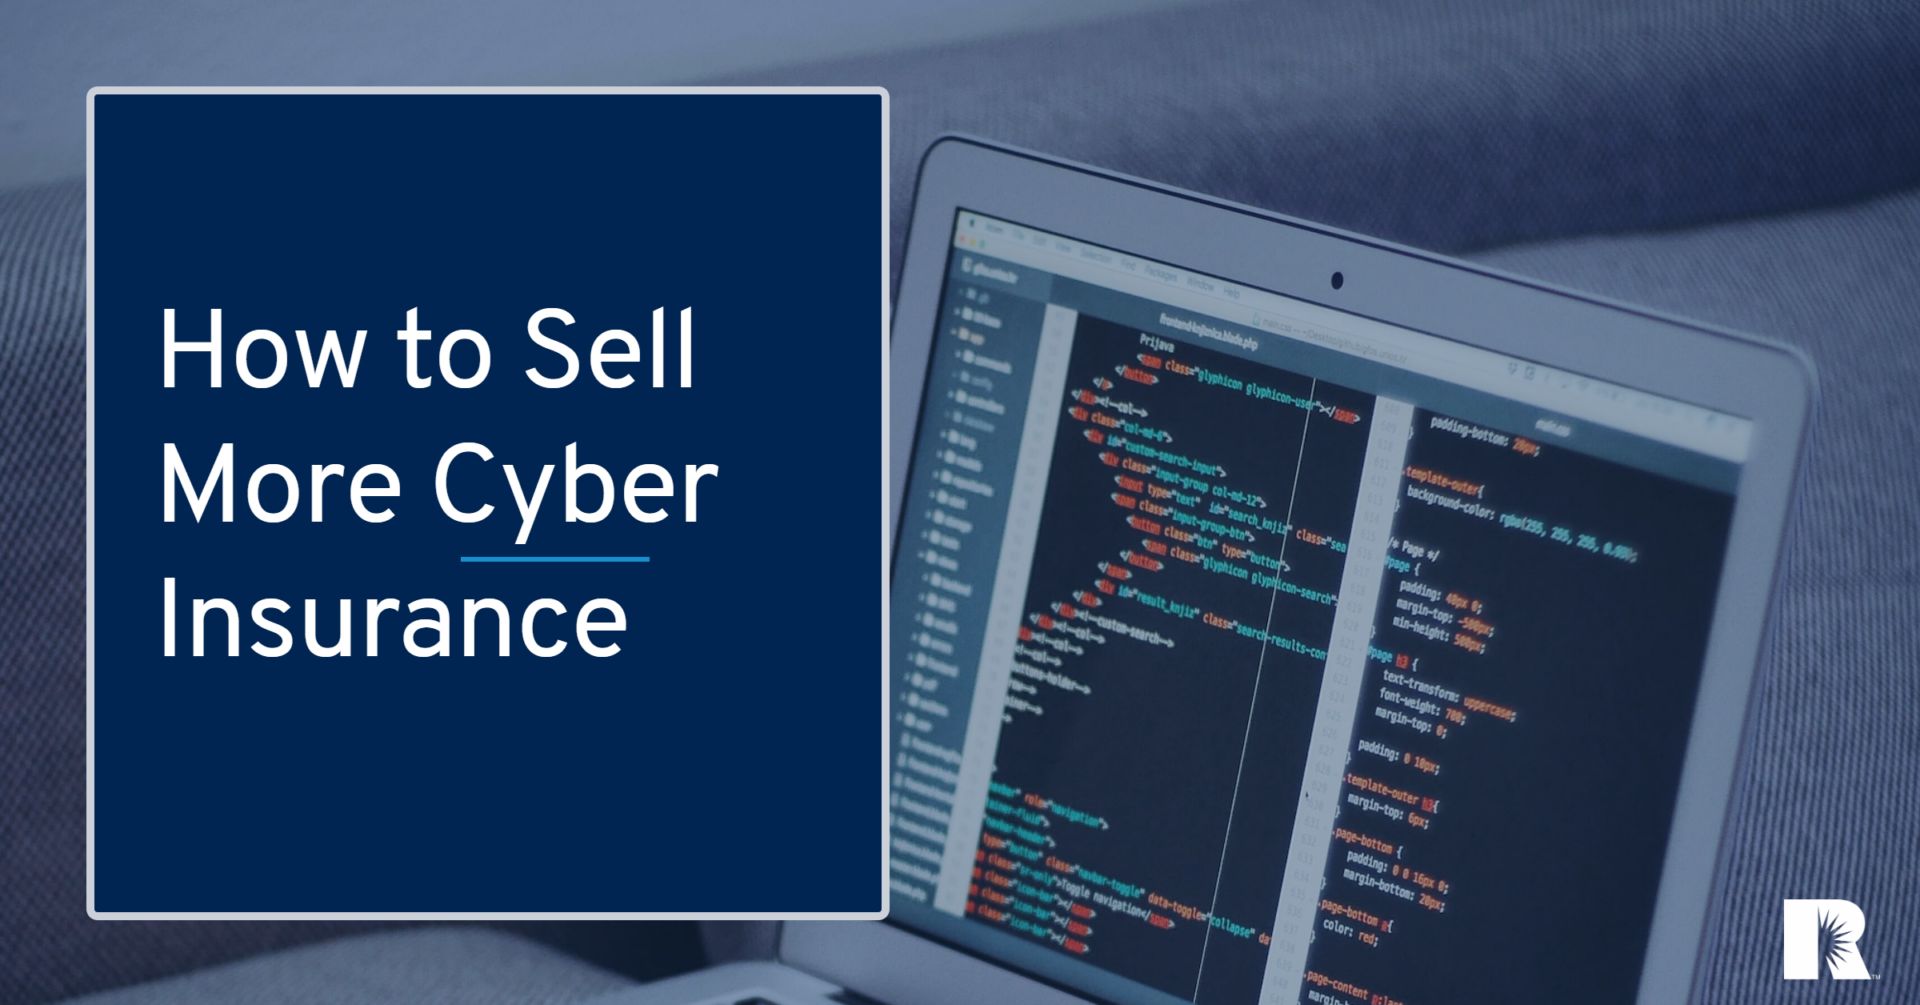 How to Sell Cyber Insurance Blog Image (2)